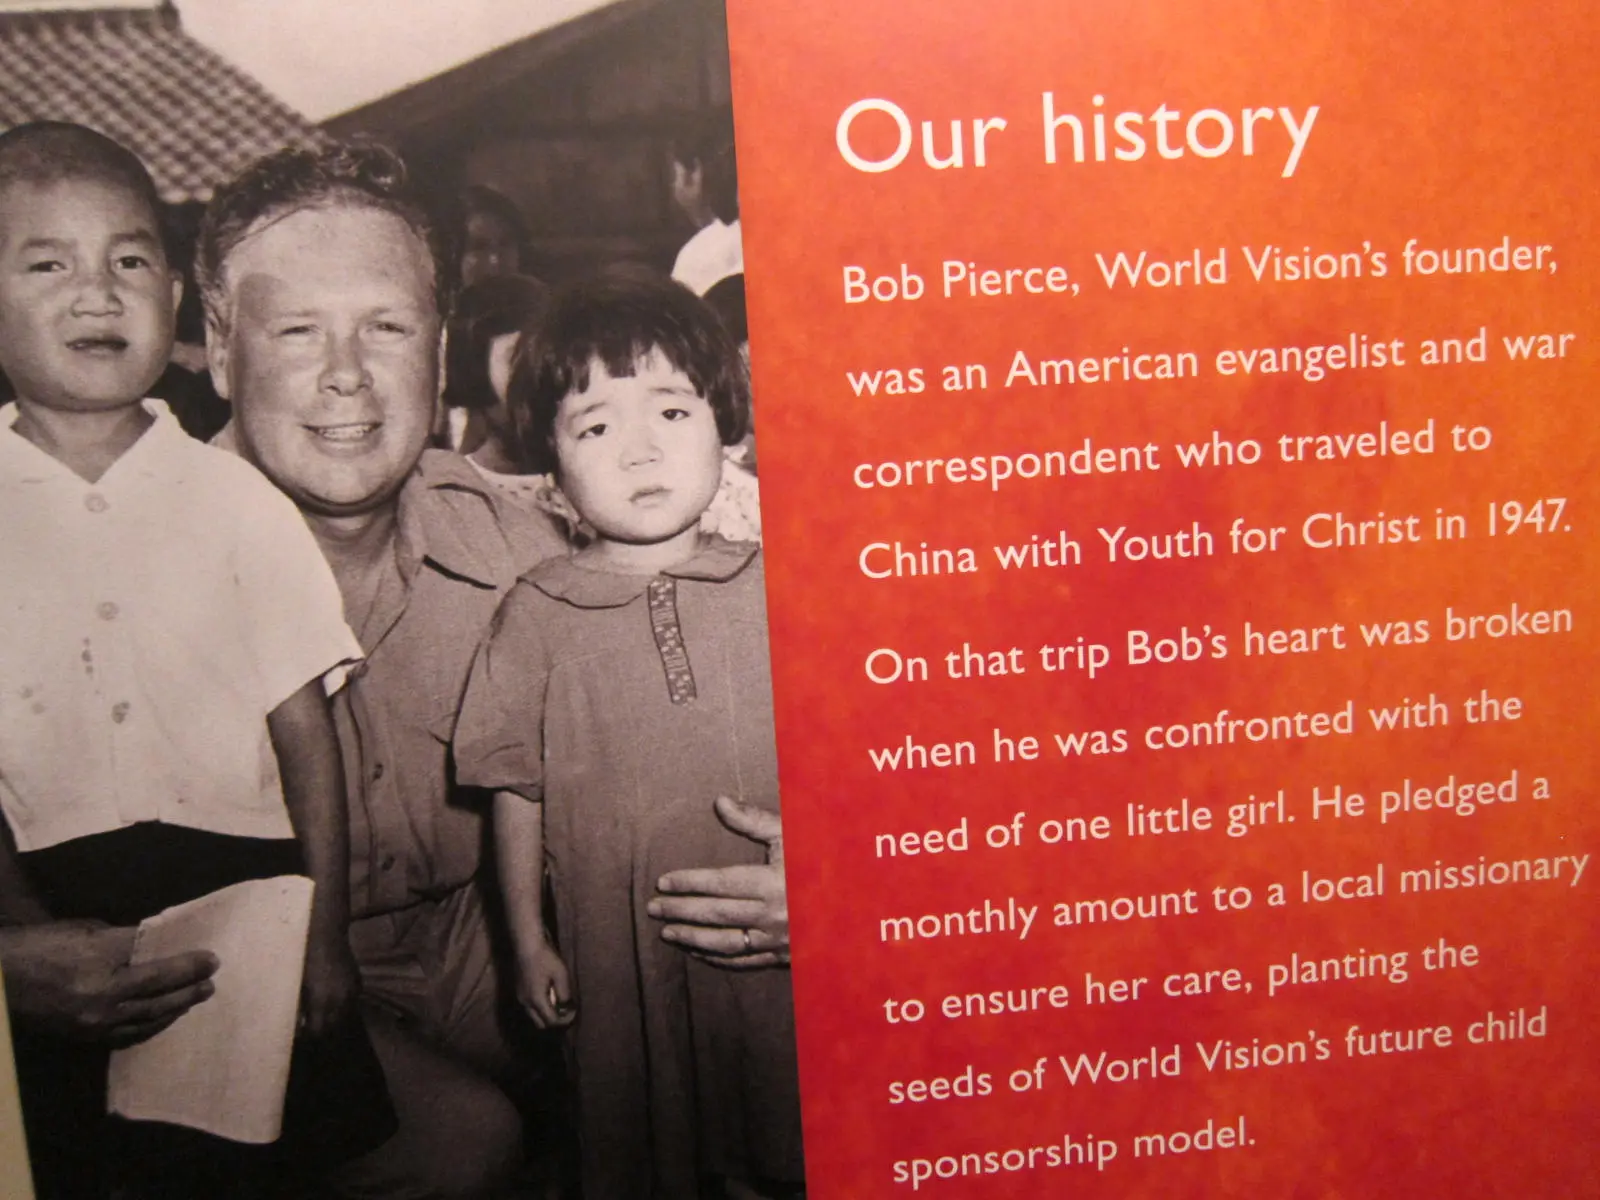 World Vision, one of the Charitable Organizations